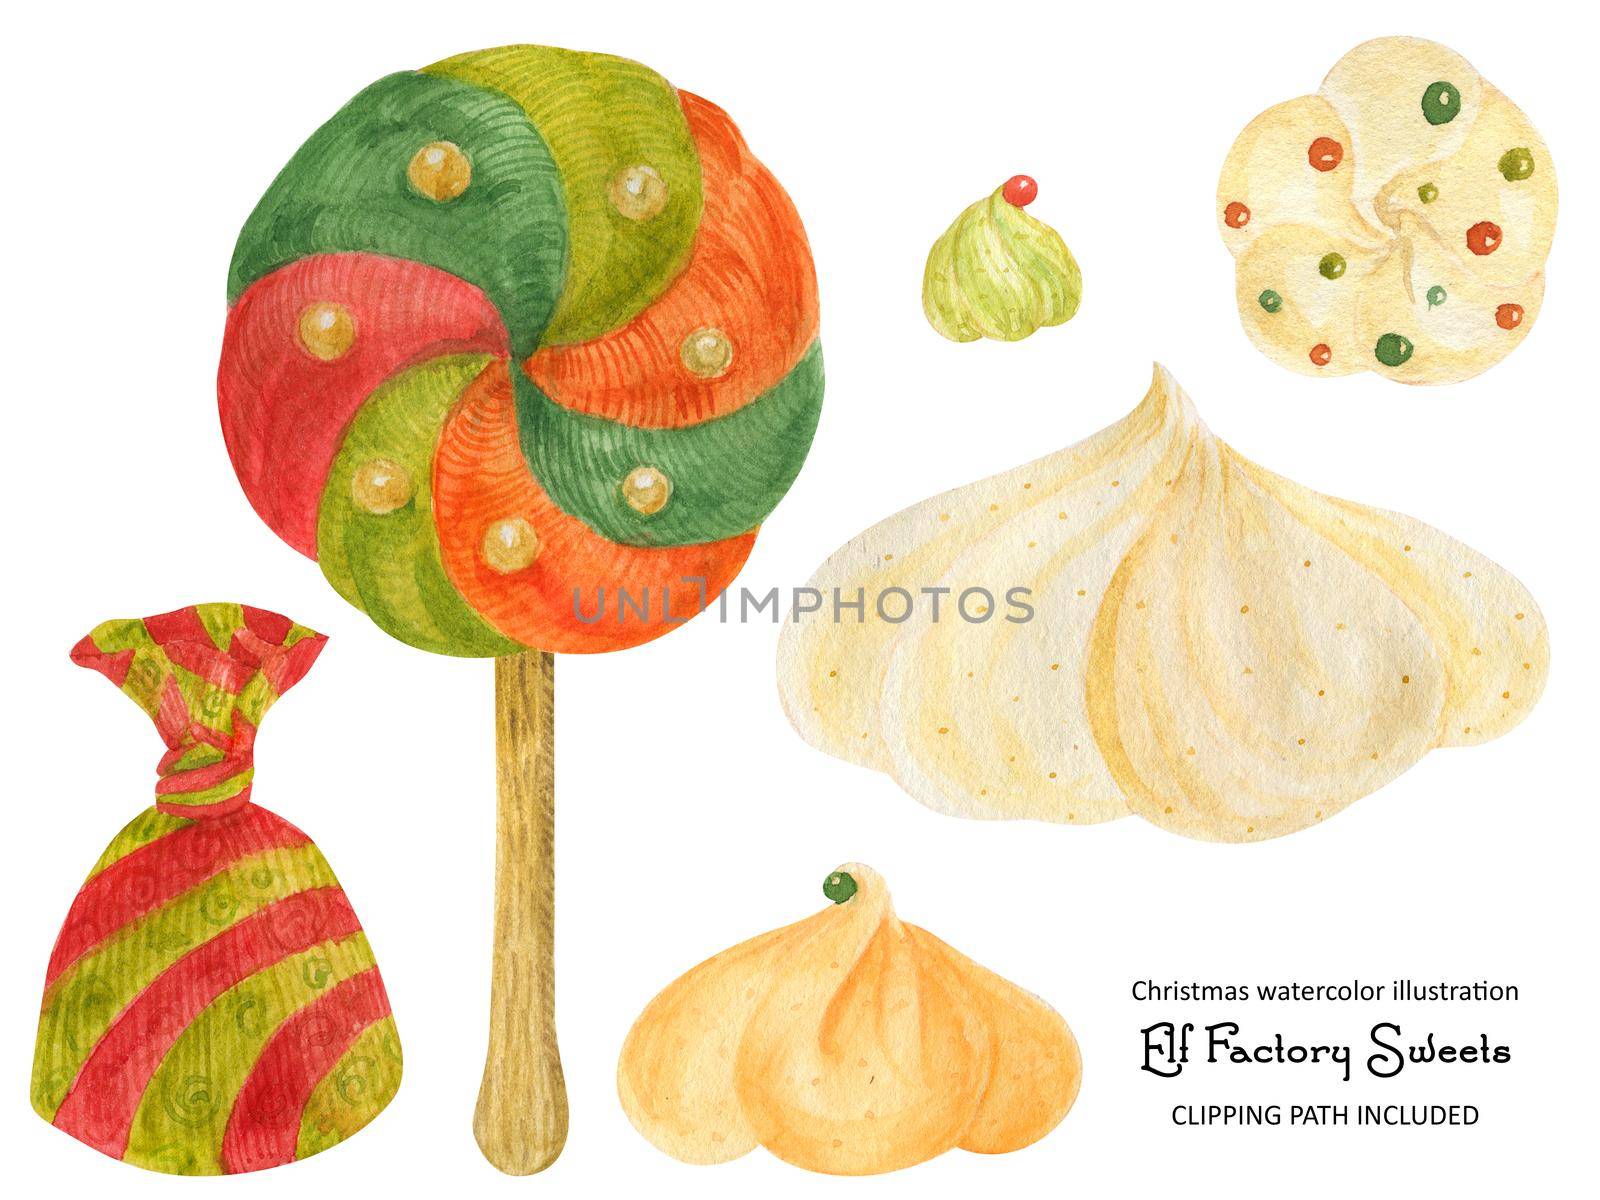 Christmas sweets lollipop and zefir, watercolor illustration by Xeniasnowstorm